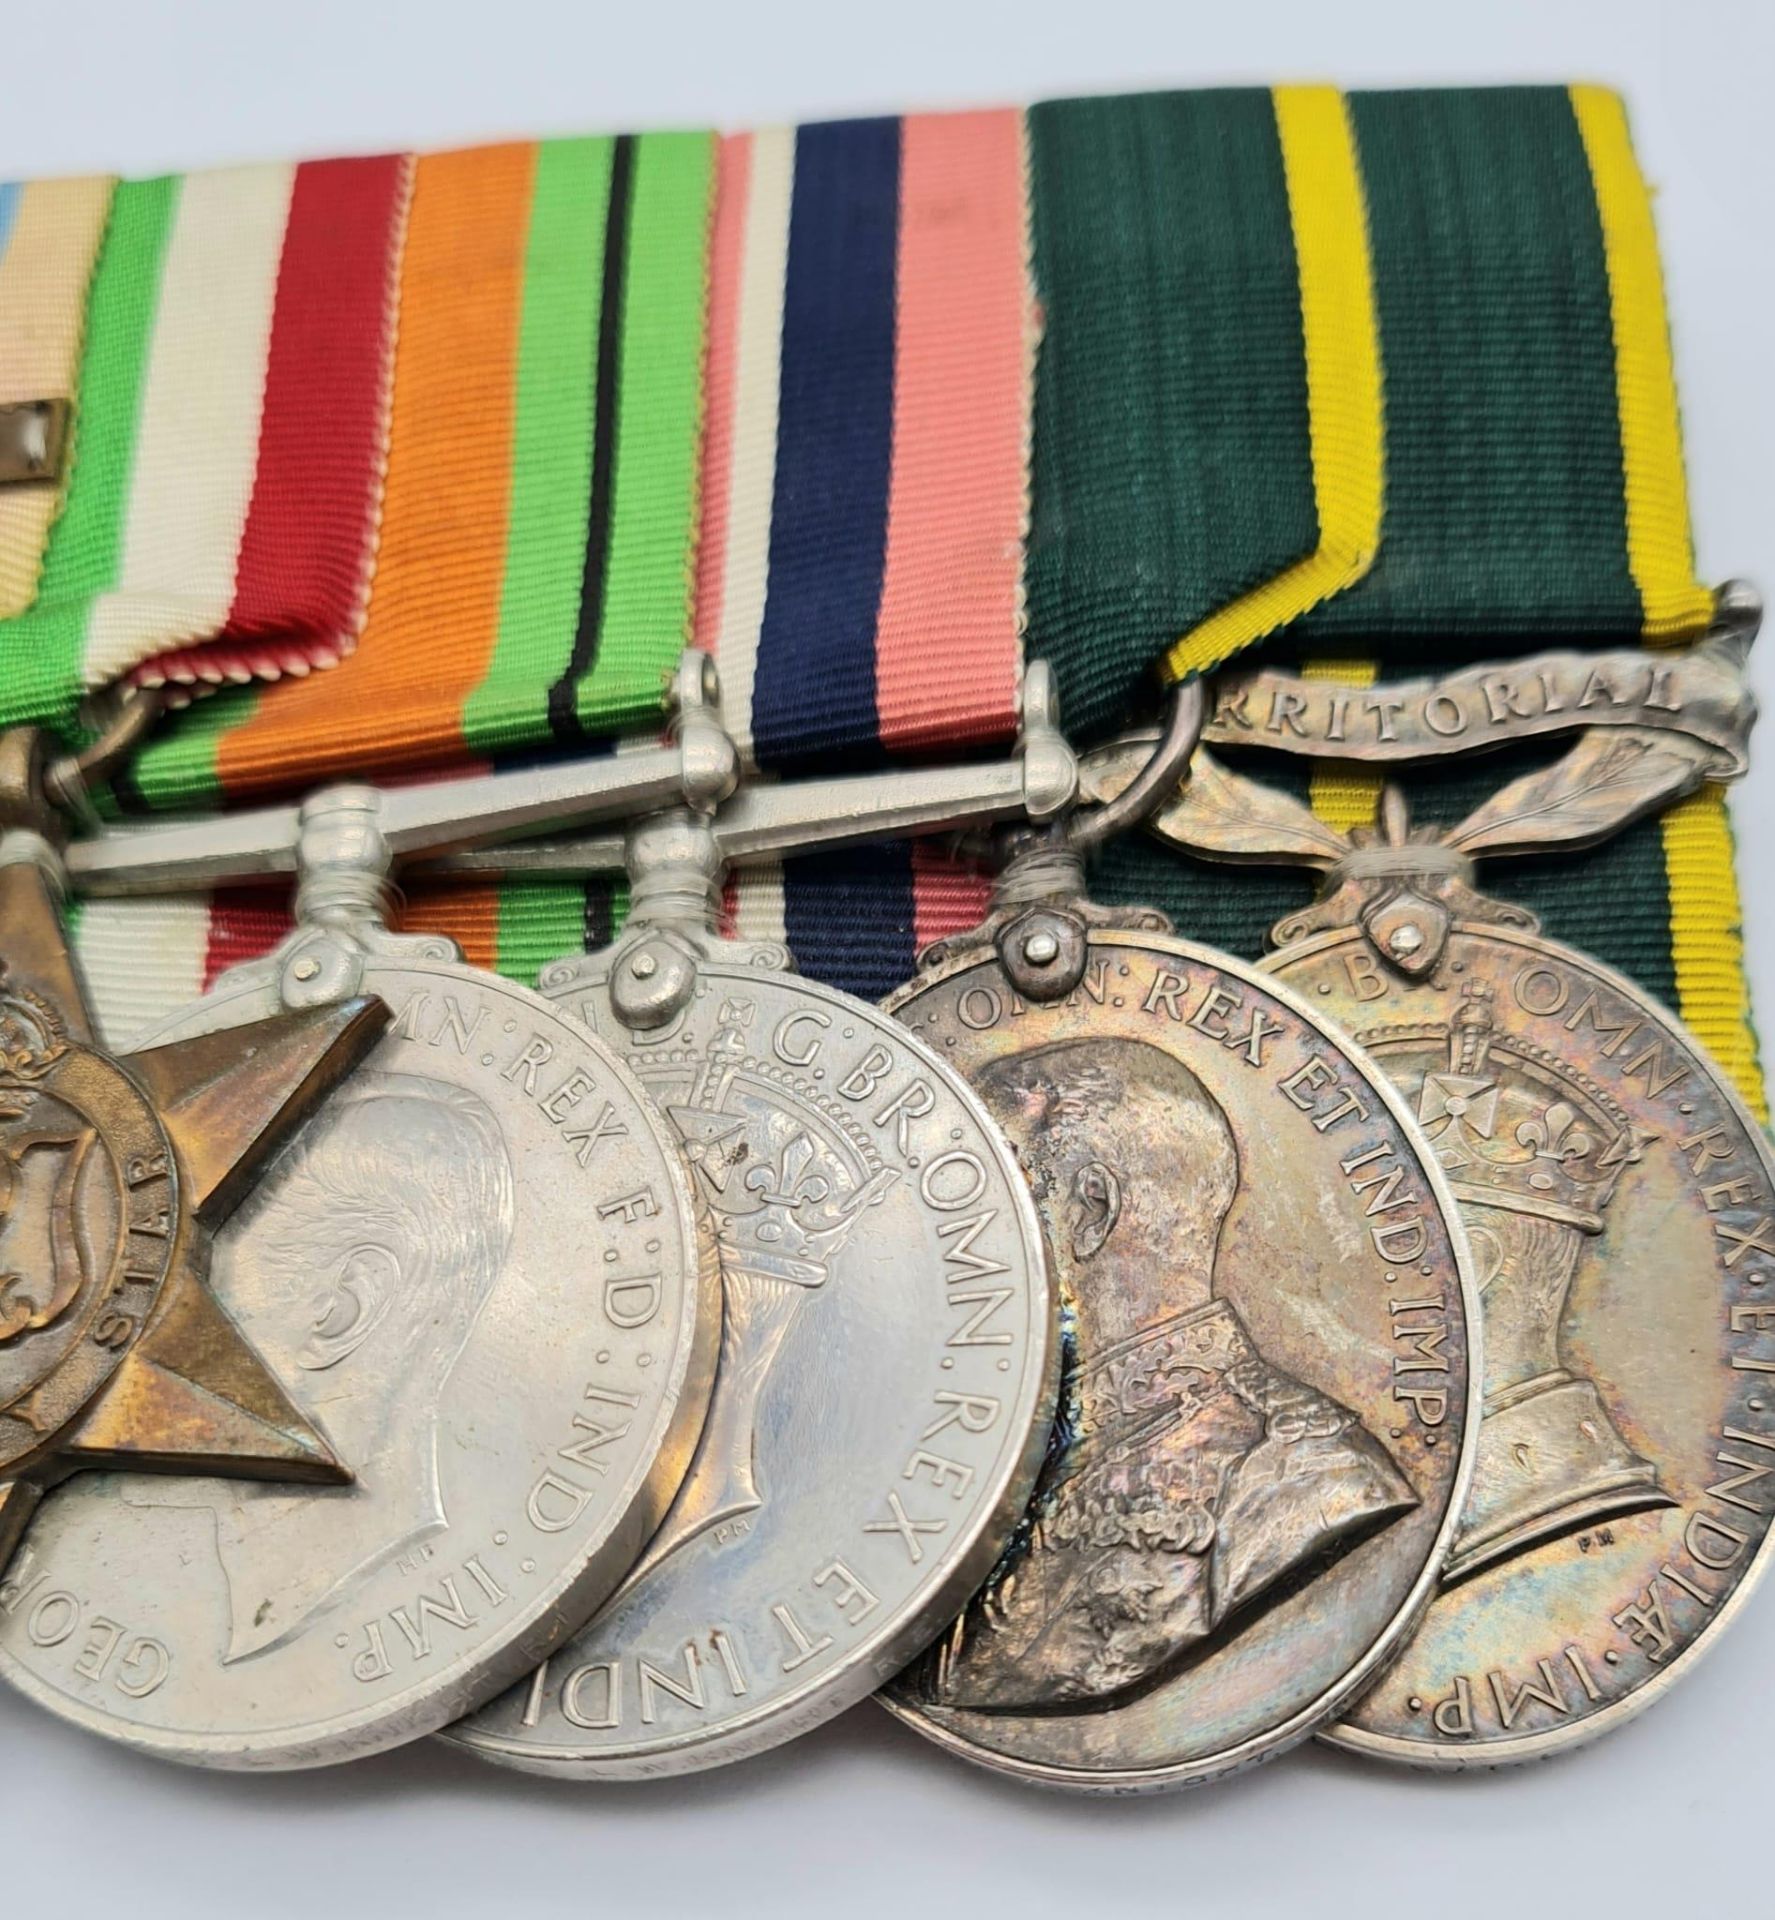 Group of nine medals awarded to Private and later Warrant Officer Class 2 Leonard Wilfred Knight who - Image 4 of 6